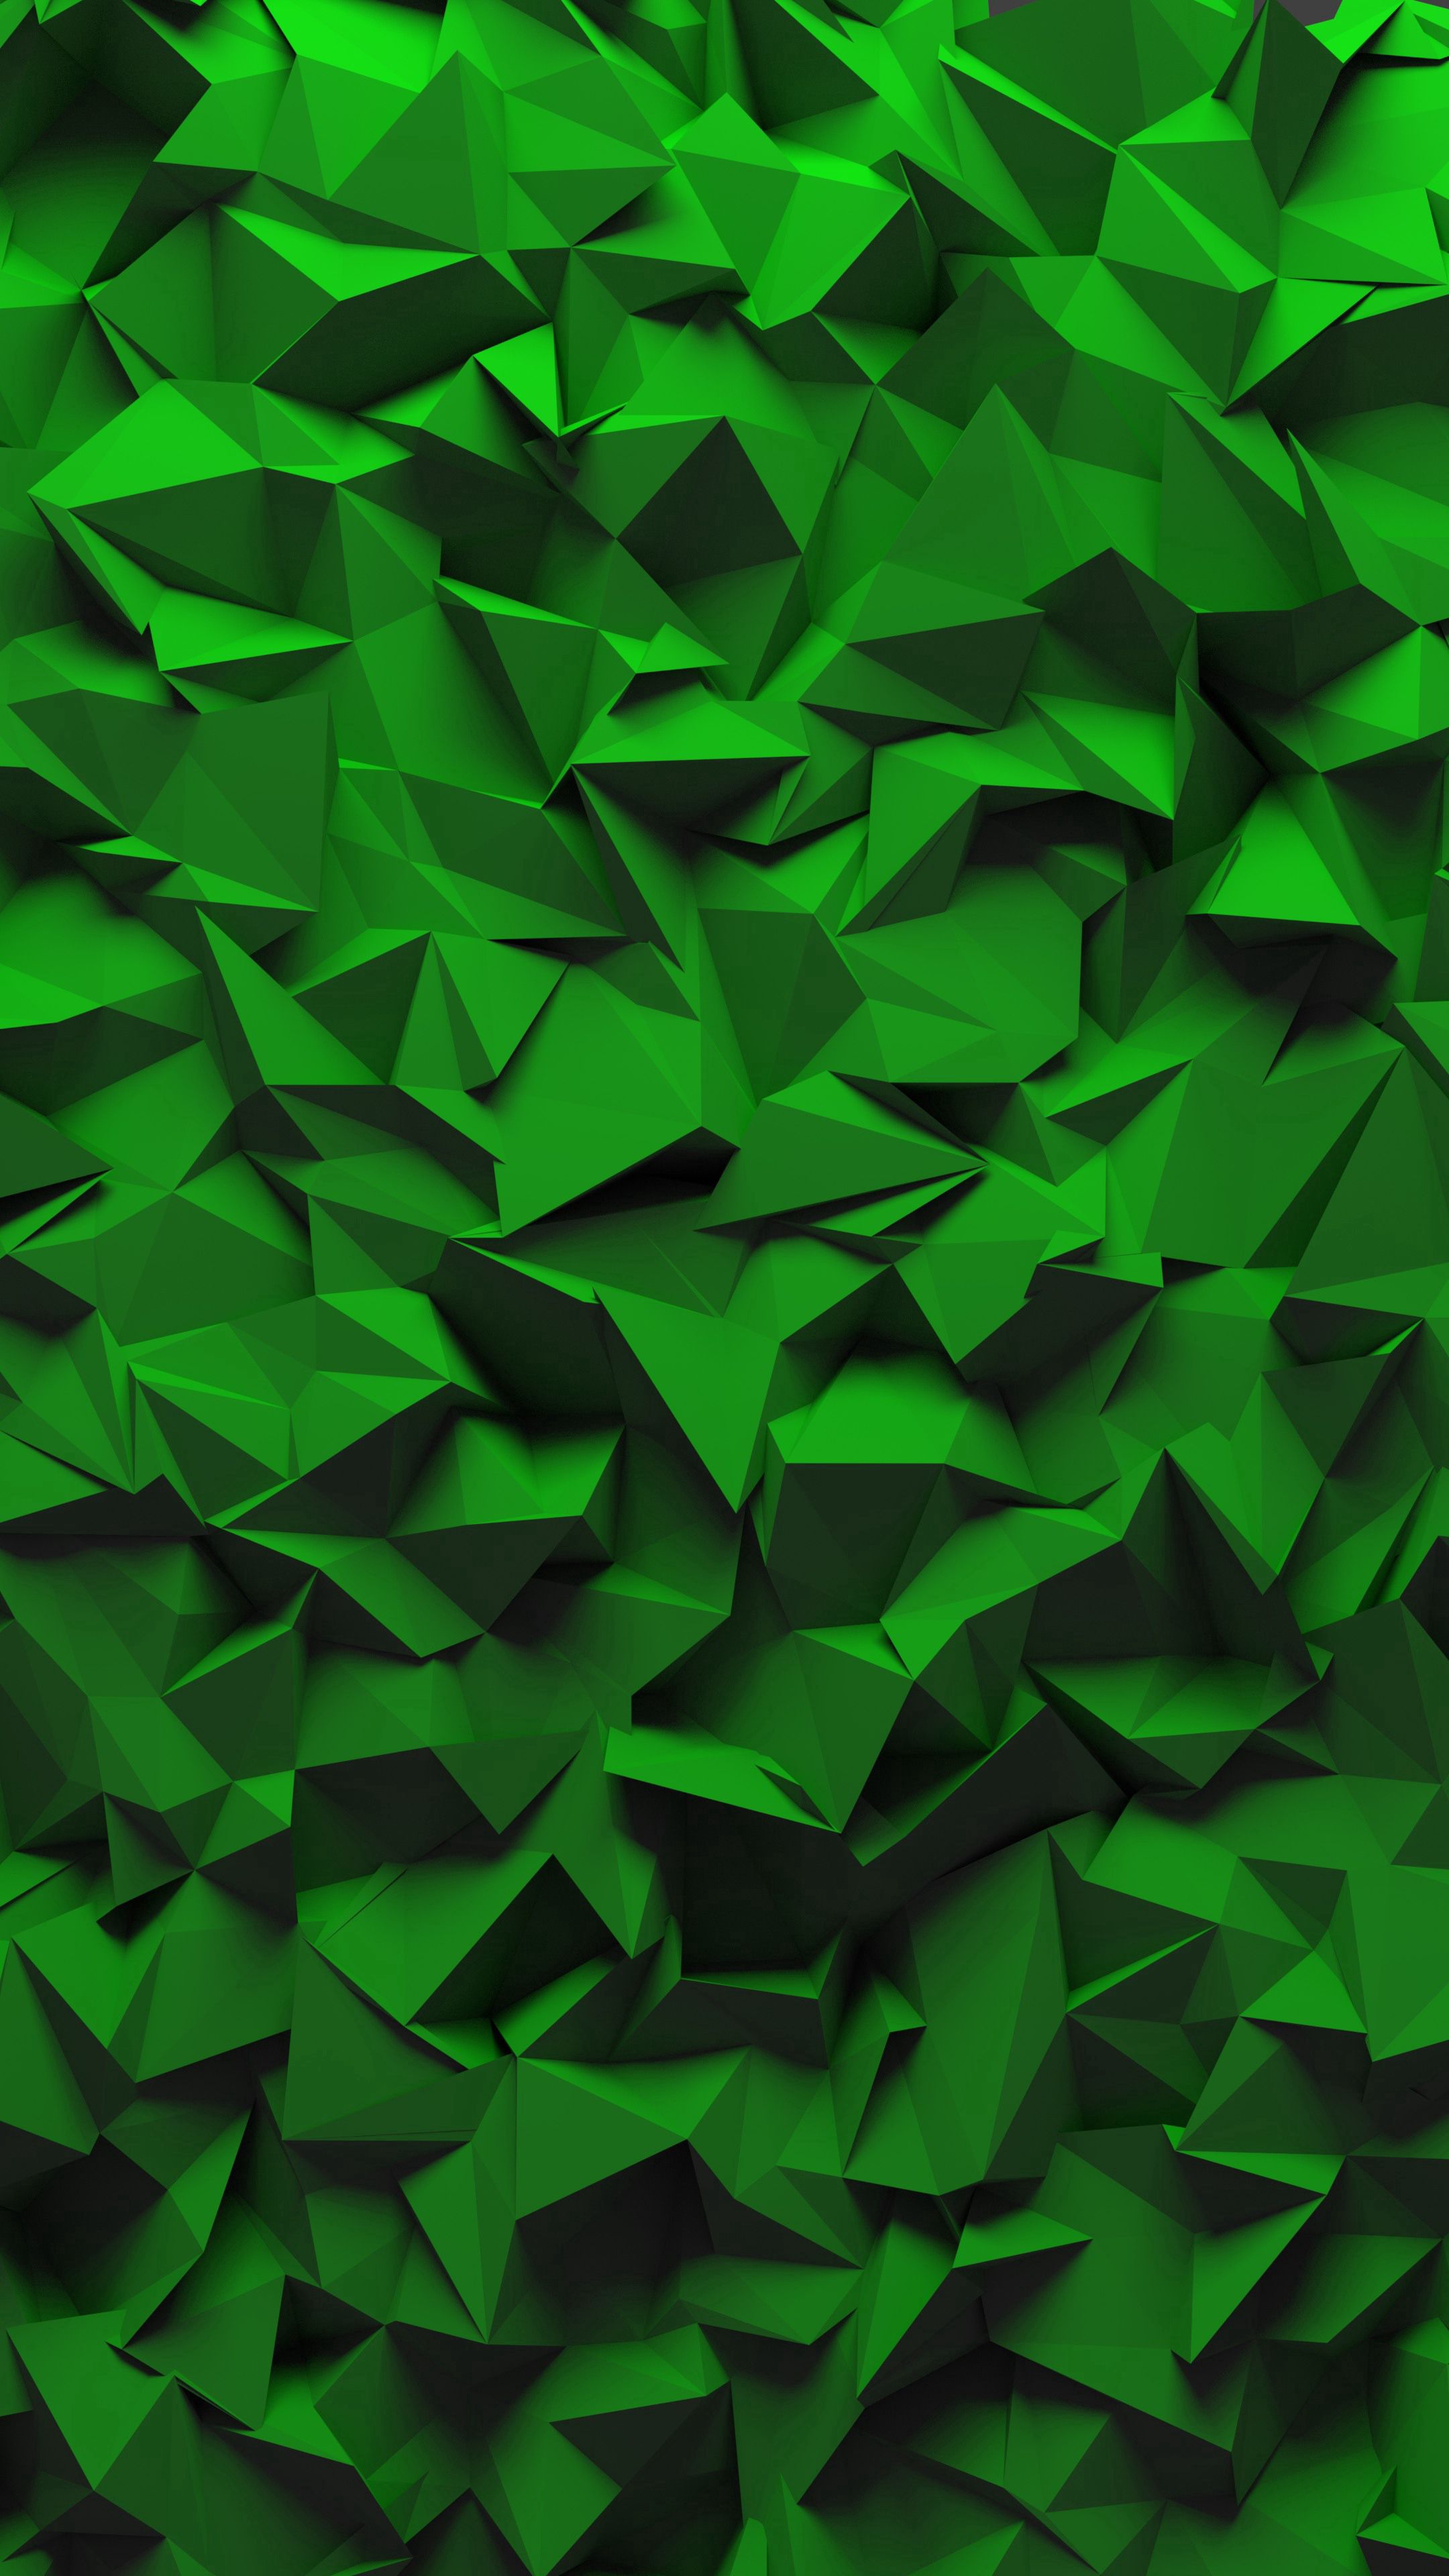 104649 download wallpaper green, texture, textures, relief, volume, volumetric, geometric screensavers and pictures for free